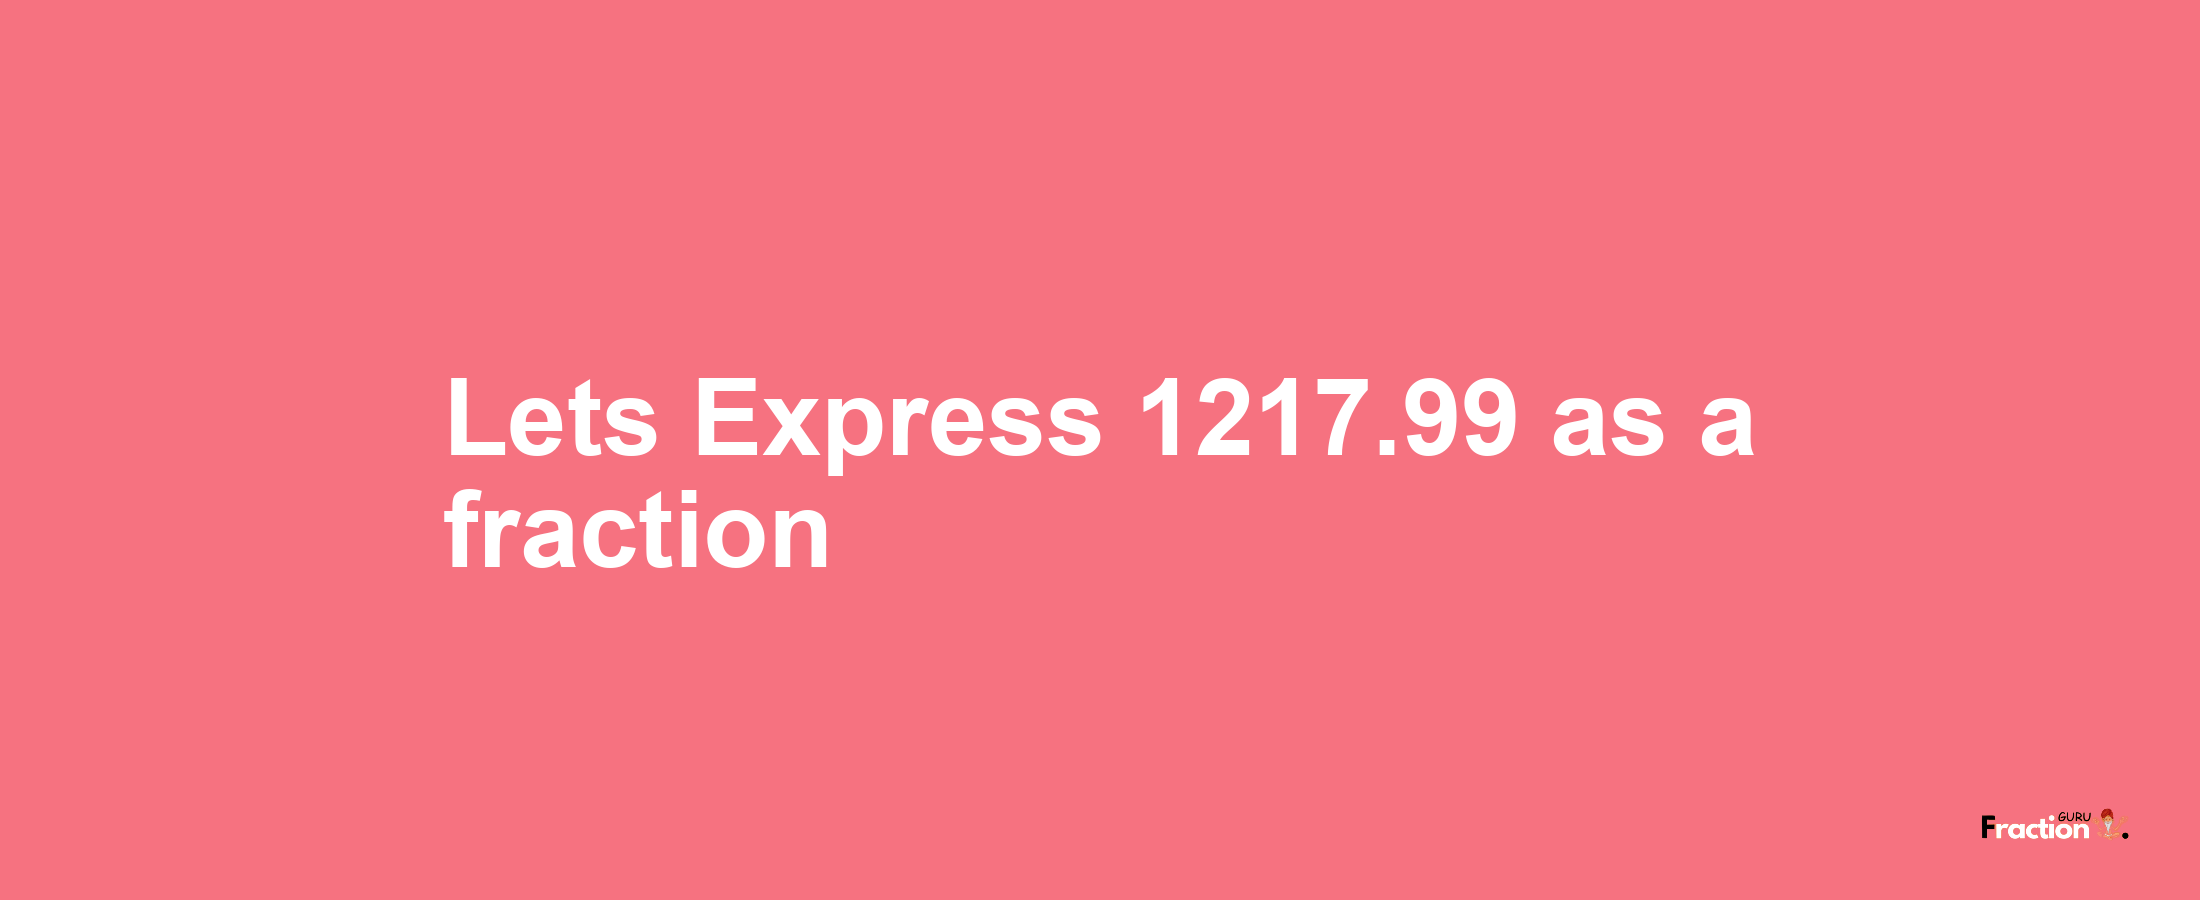 Lets Express 1217.99 as afraction